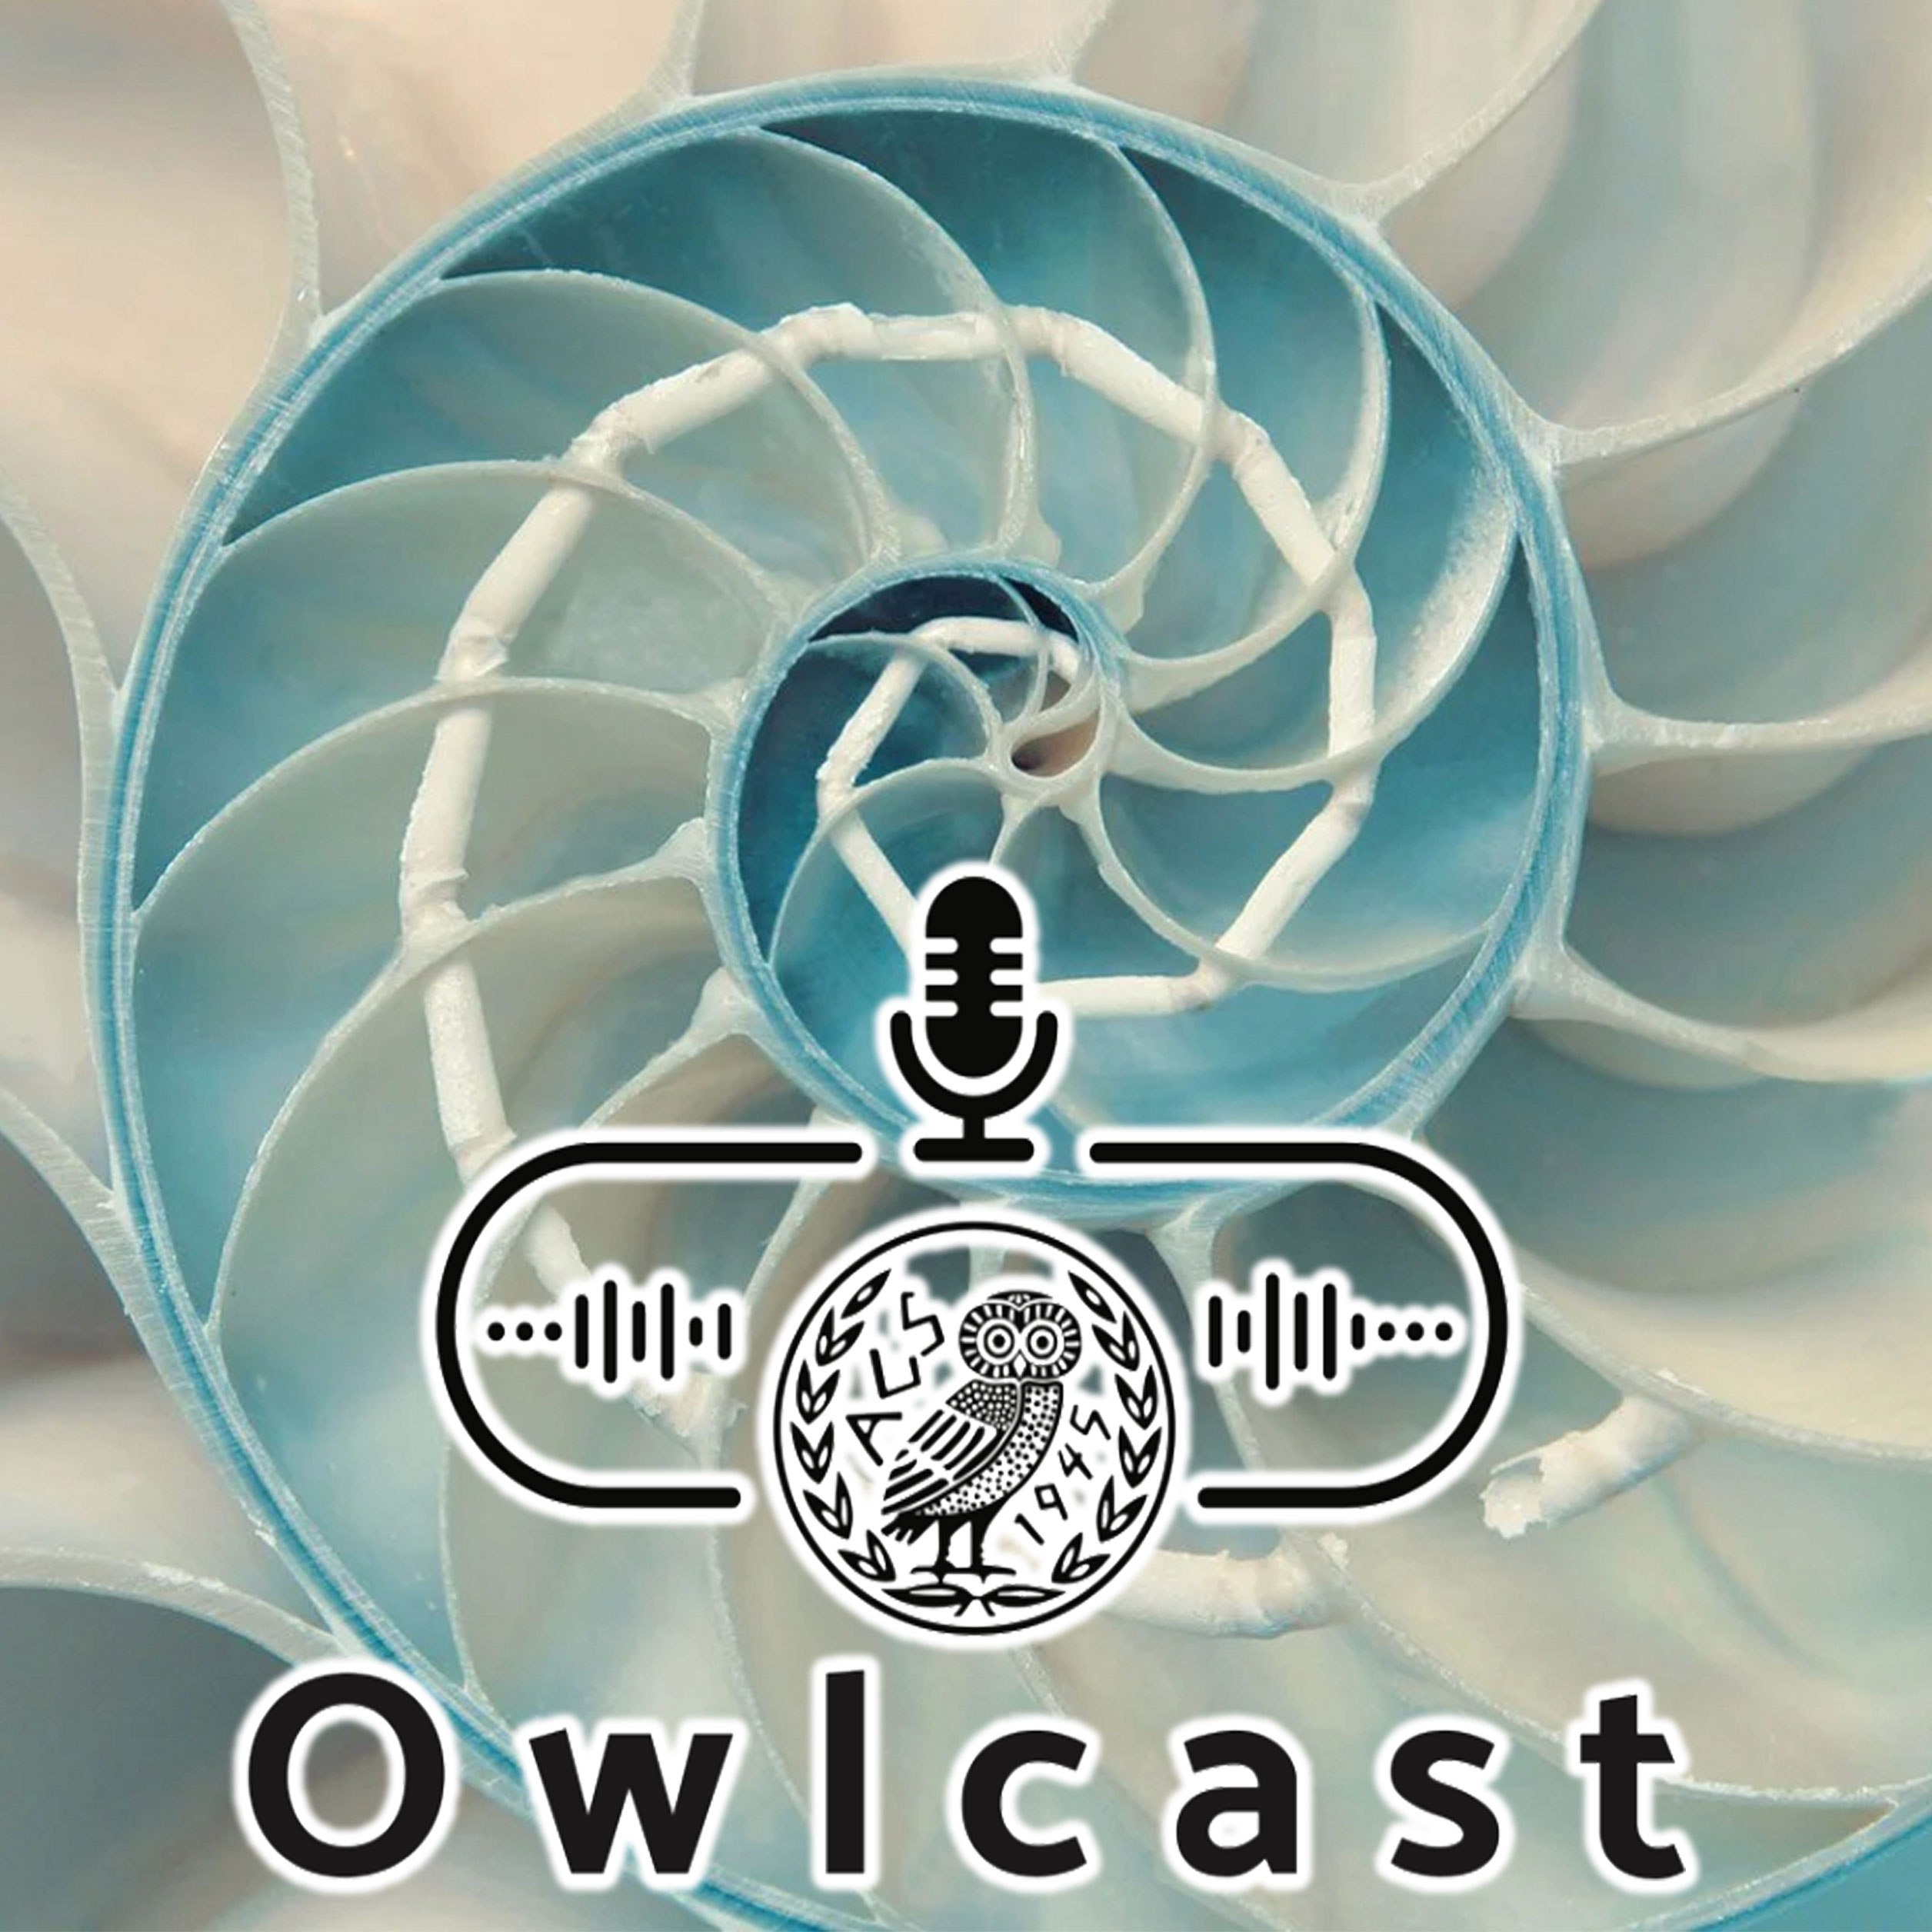 Owlcast 91 - The Innovation Lab of the Institute's Future Academy